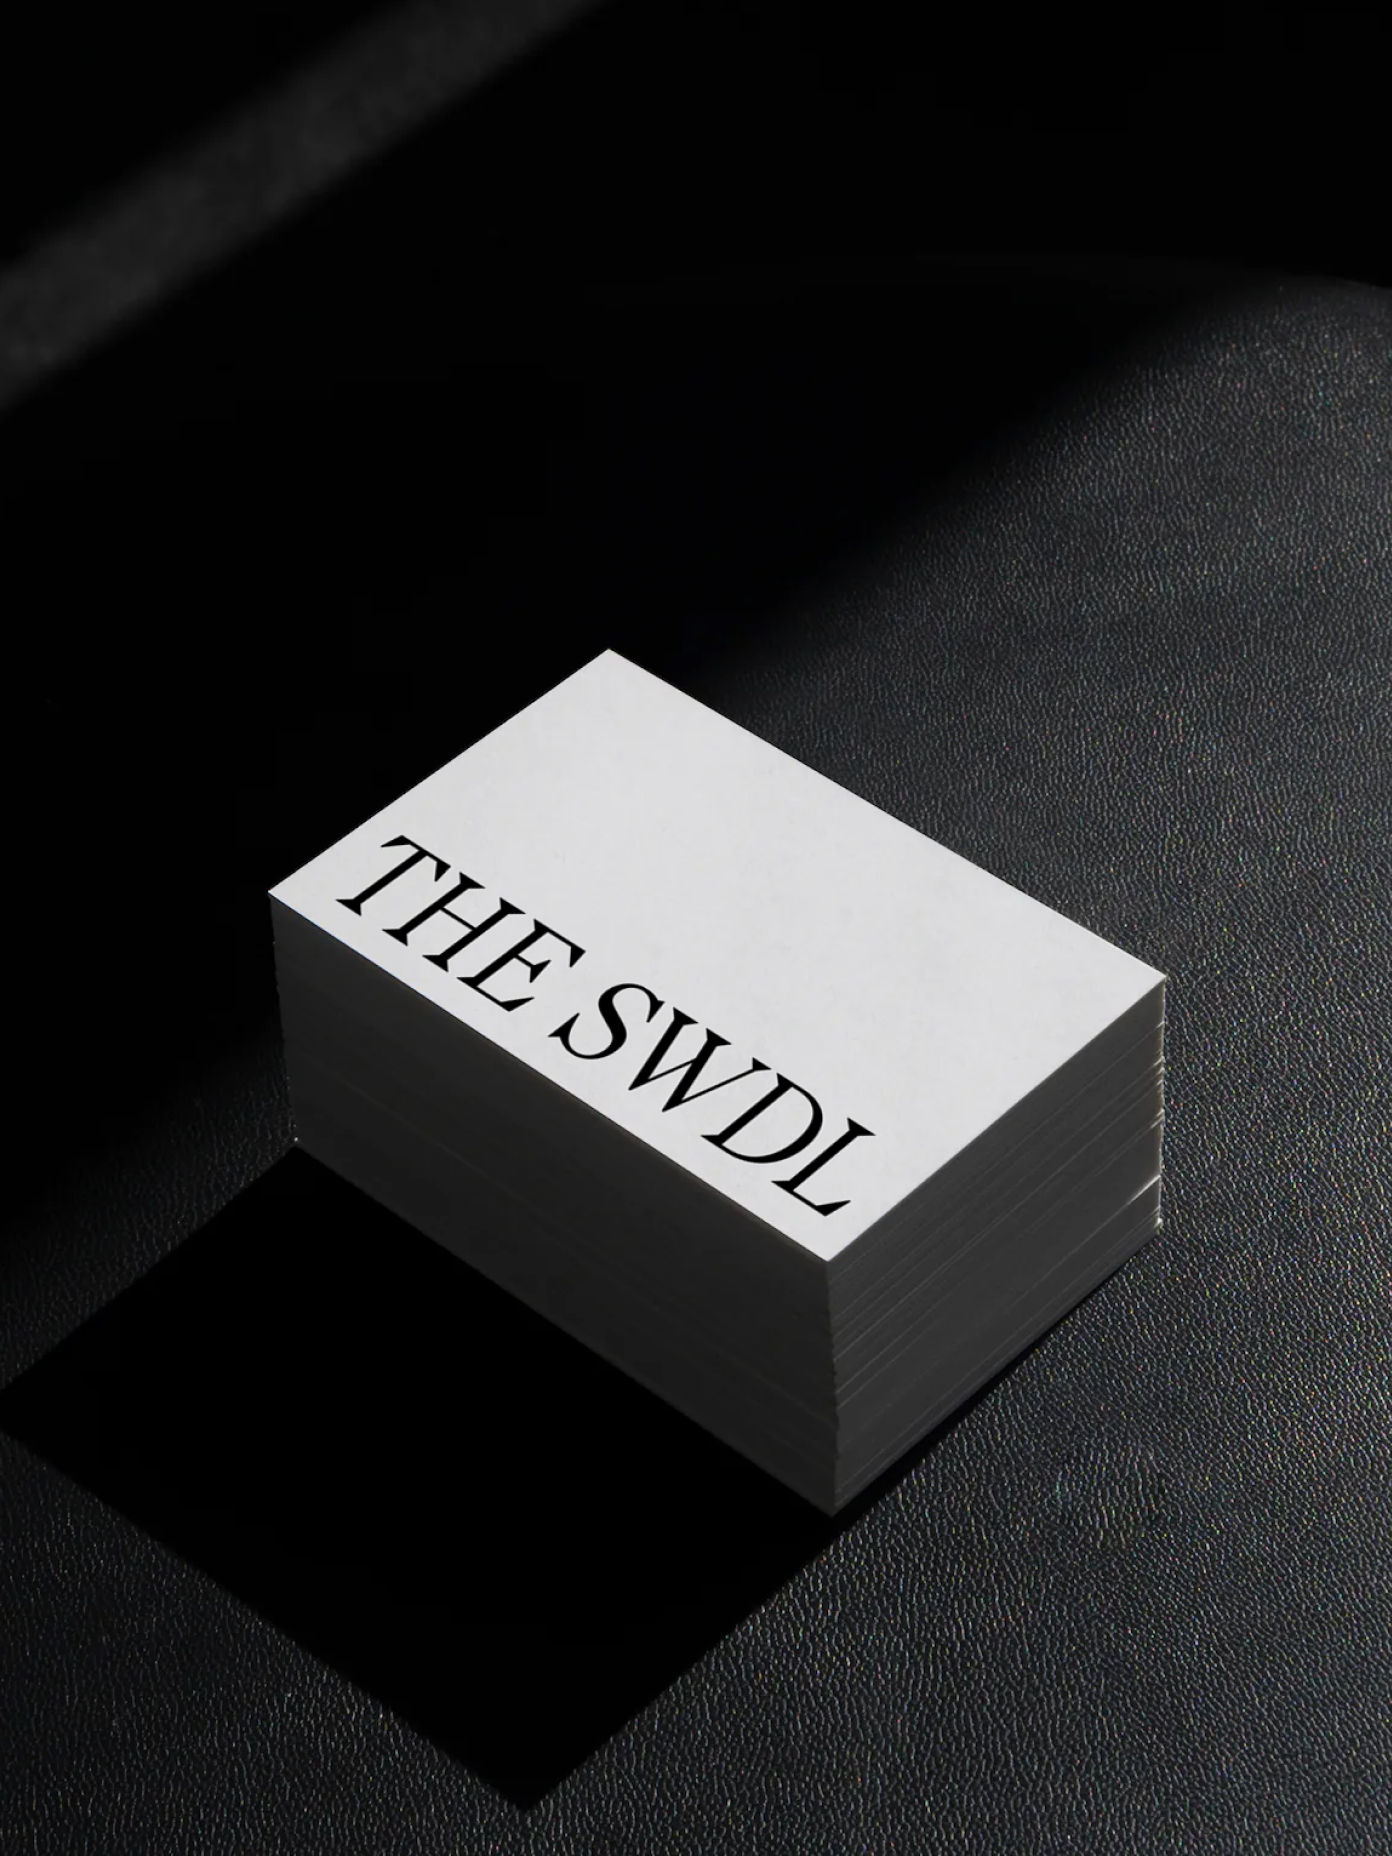 Swaddle new logo on business cards 